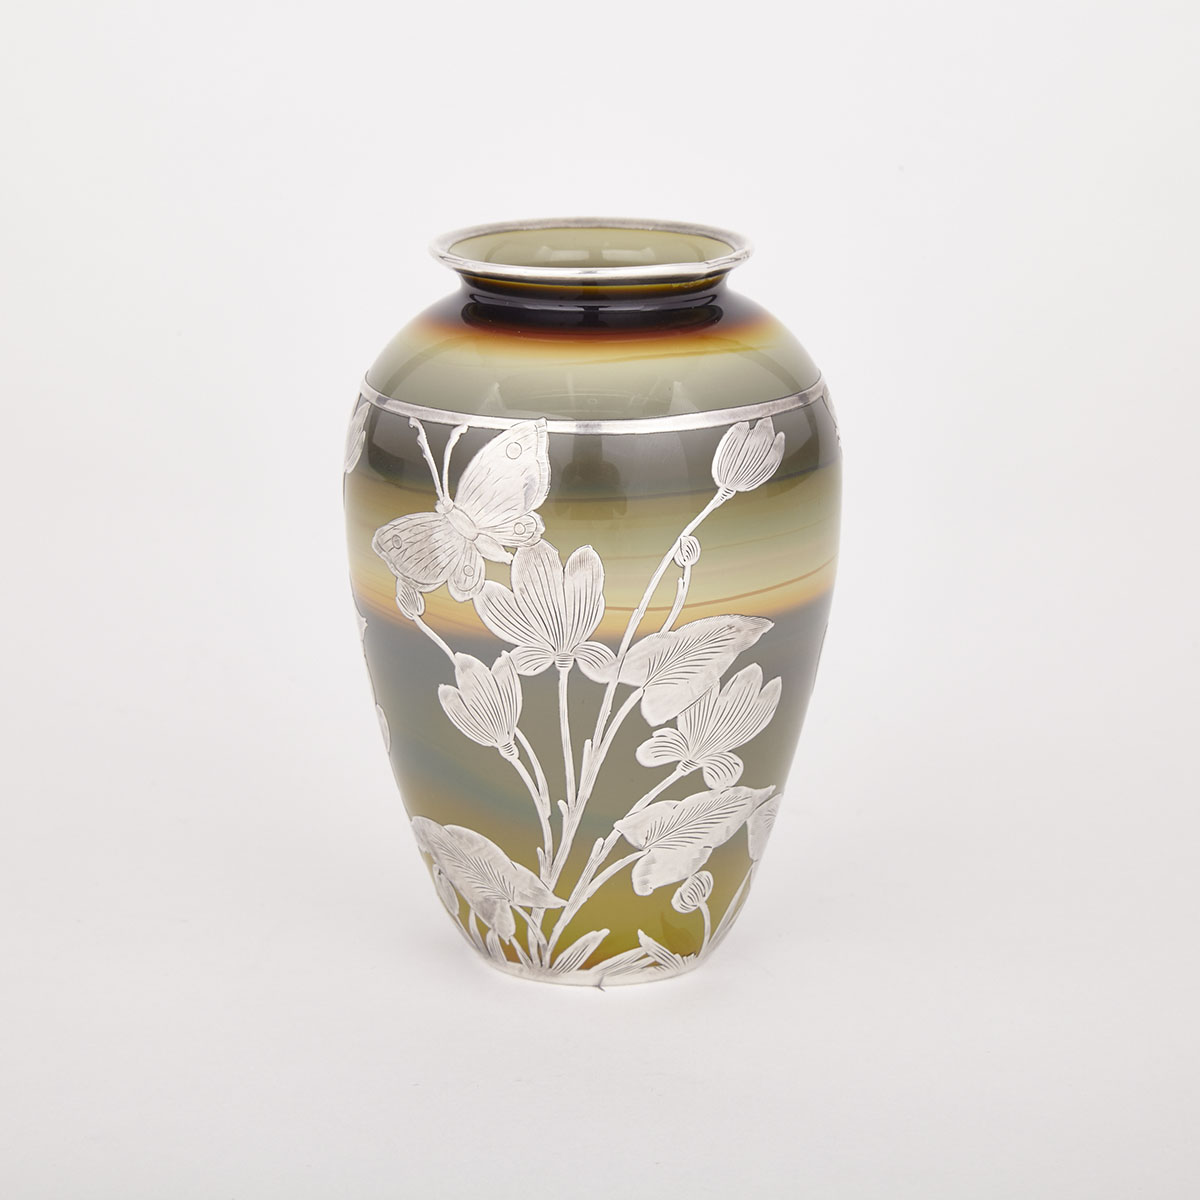 Quezal Silver Overlaid Agate Glass Vase, early 20th century